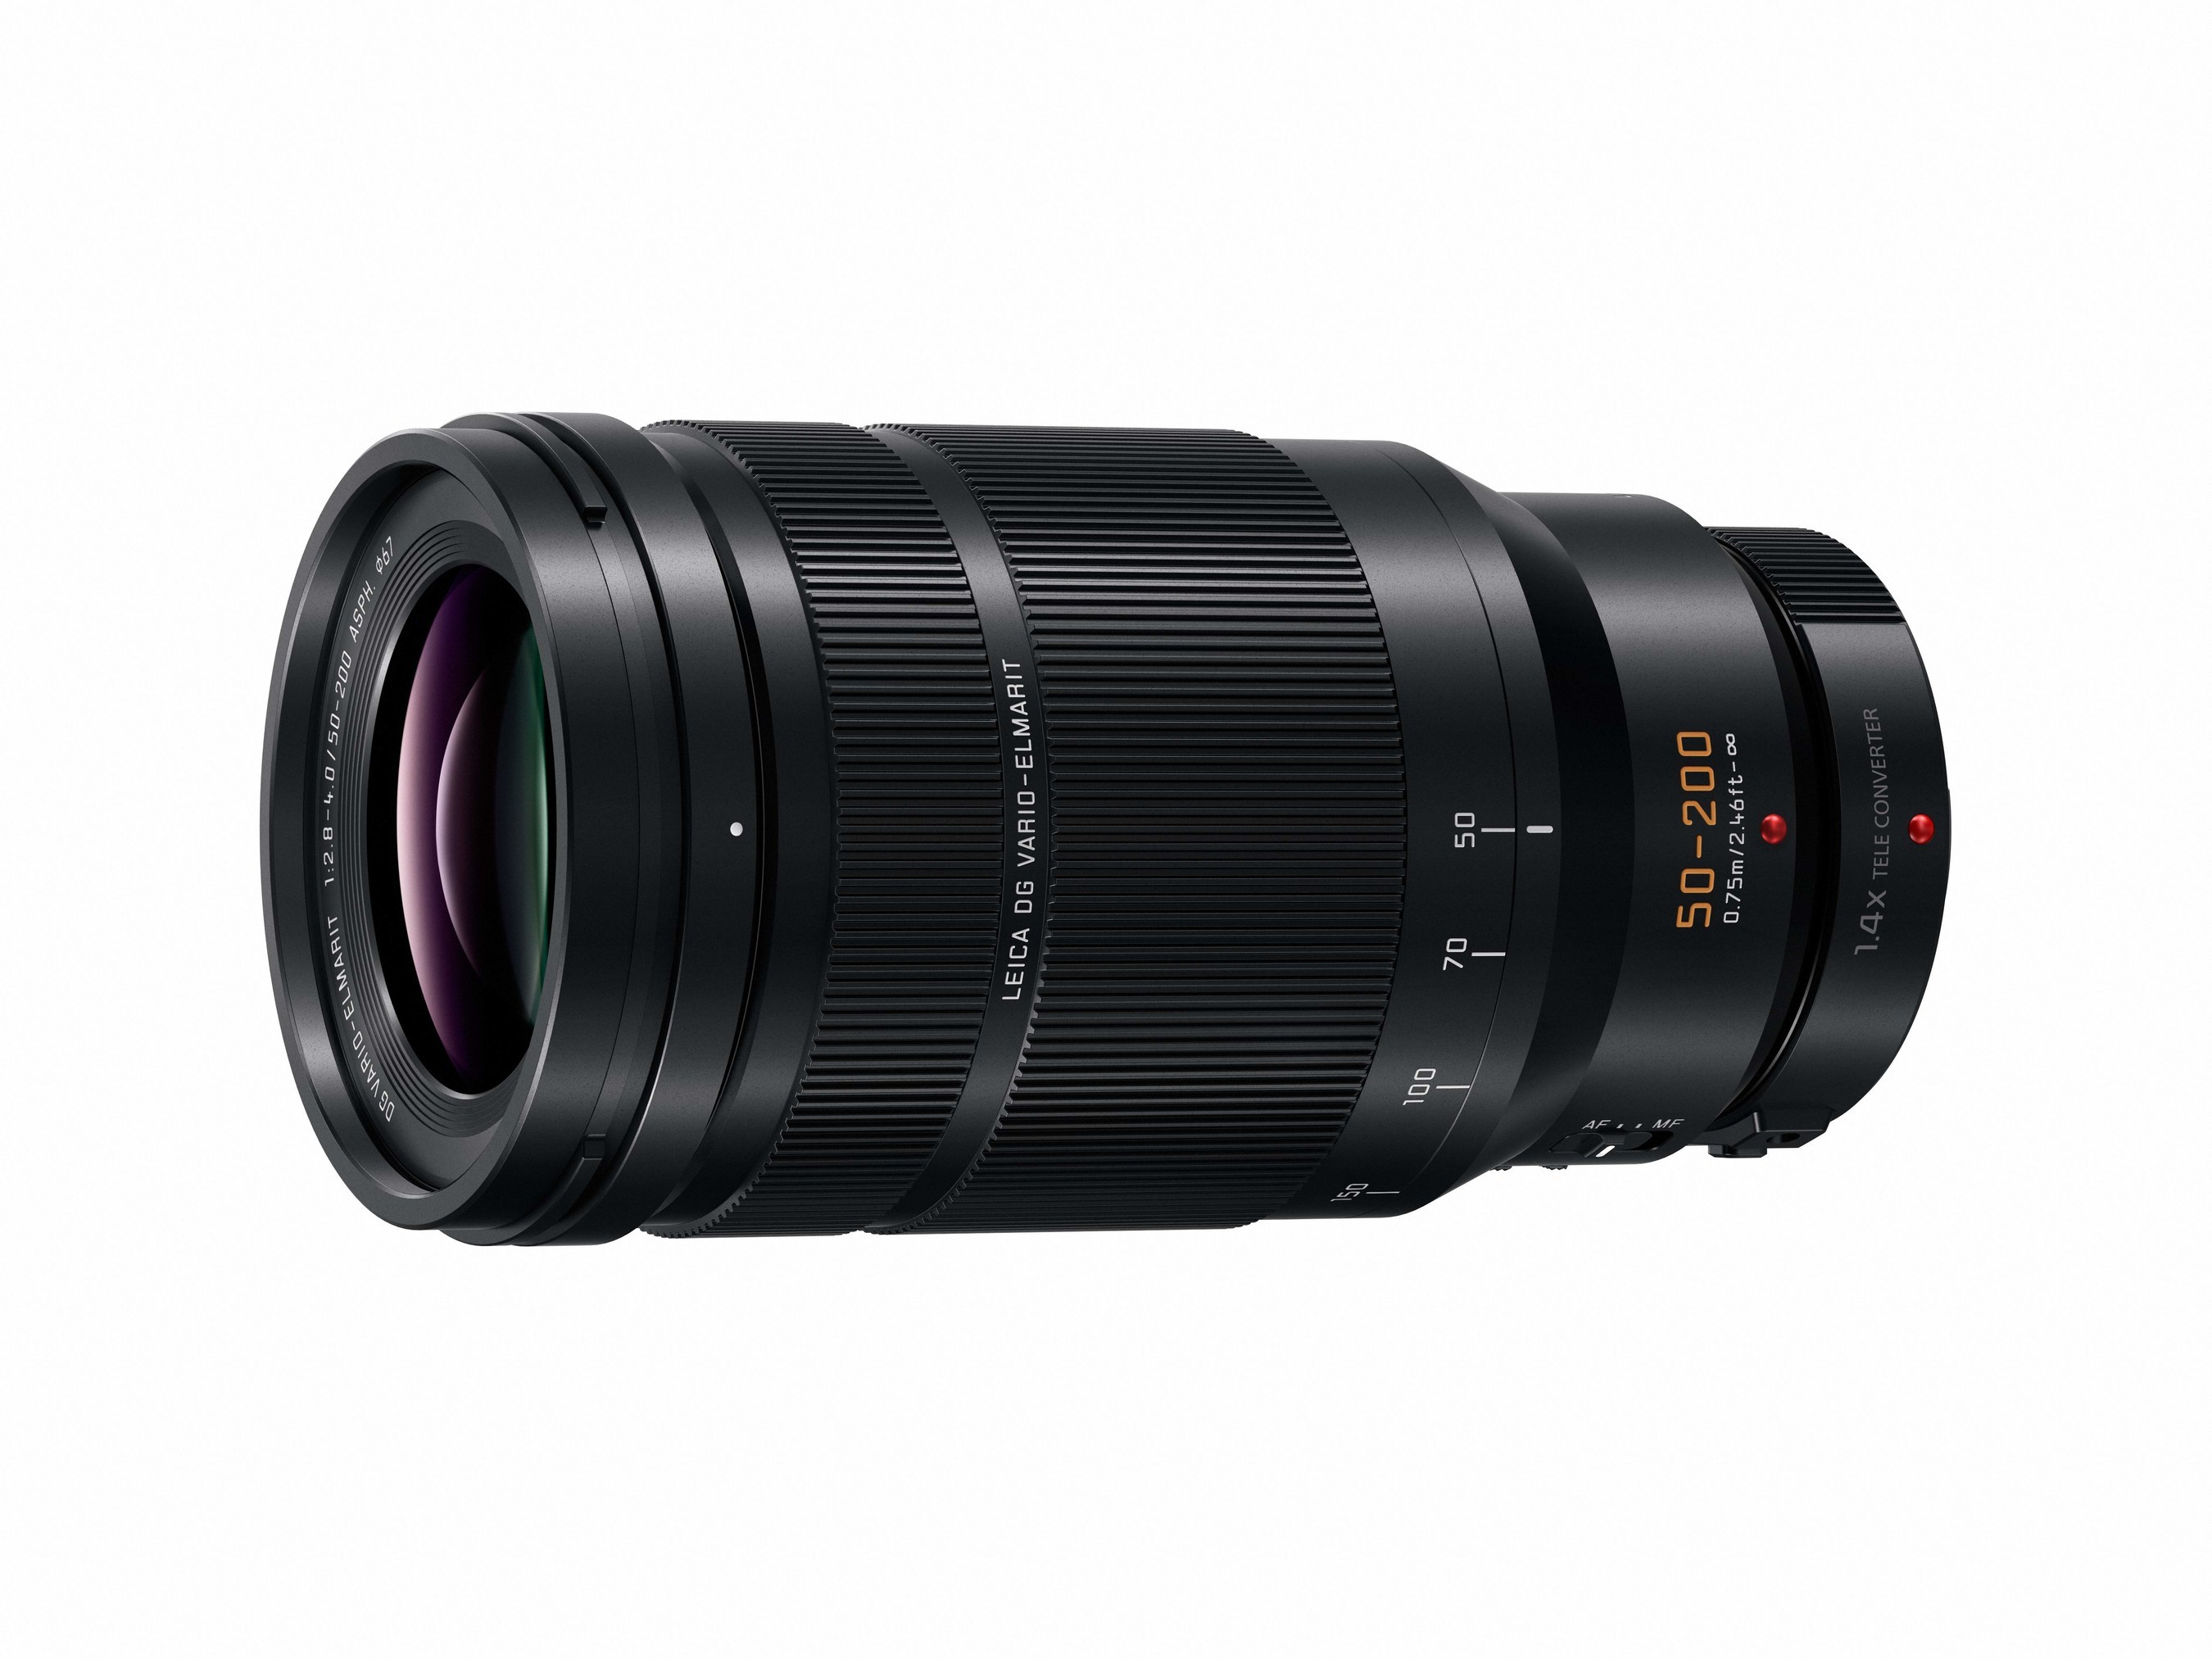 The New Ultra Telephoto Zoom Lens for Superb Image Quality LEICA DG VARIO-ELMARIT 50-200mm / F2.8-4.0 ASPH. (H-ES50200) 100 mm to 400 mm* Super Telephoto with High Mobility